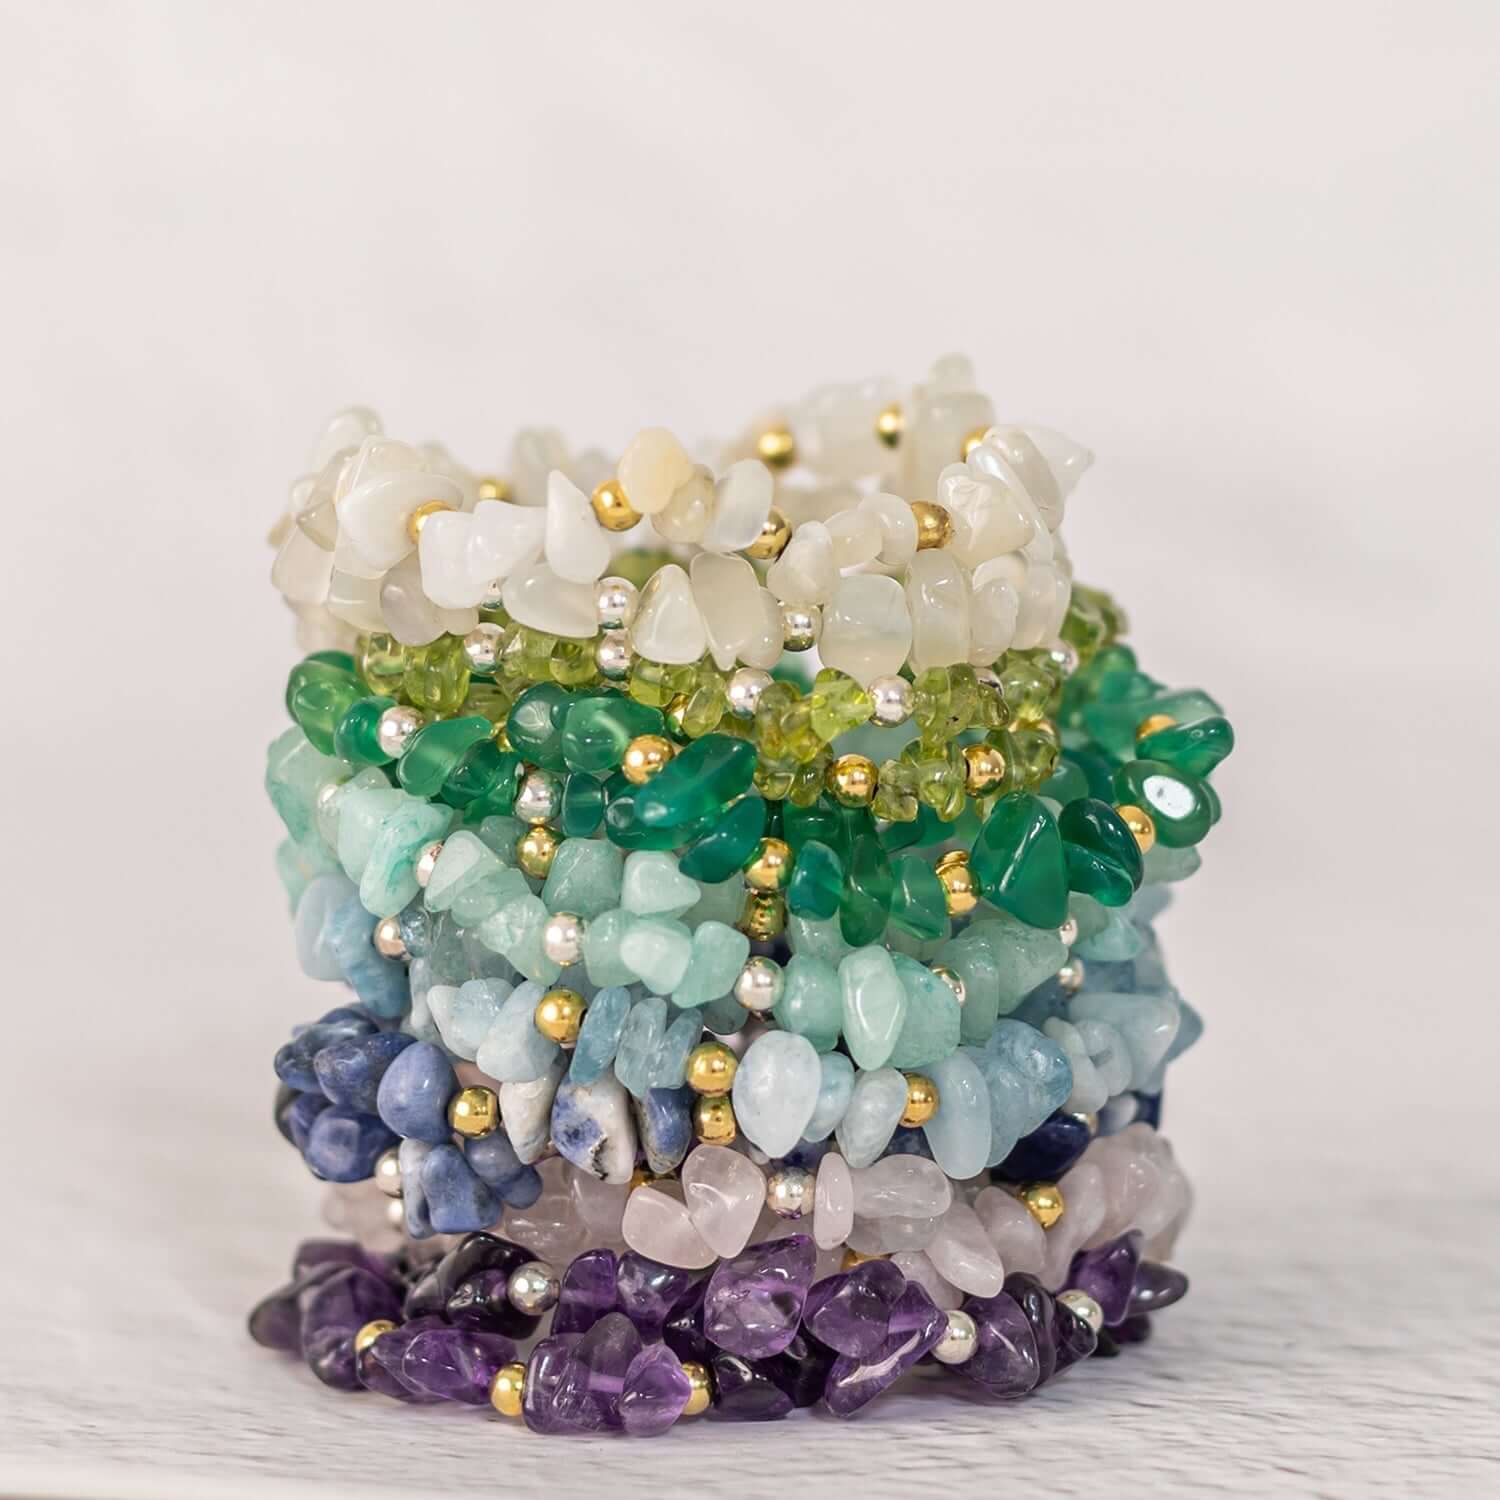 A stack of beaded gemstone bracelets featuring various colors: white, green, blue, and purple. Each bracelet is composed of irregularly shaped polished stones with small gold and silver beads, womens gold jewellery, arranged neatly on a light background